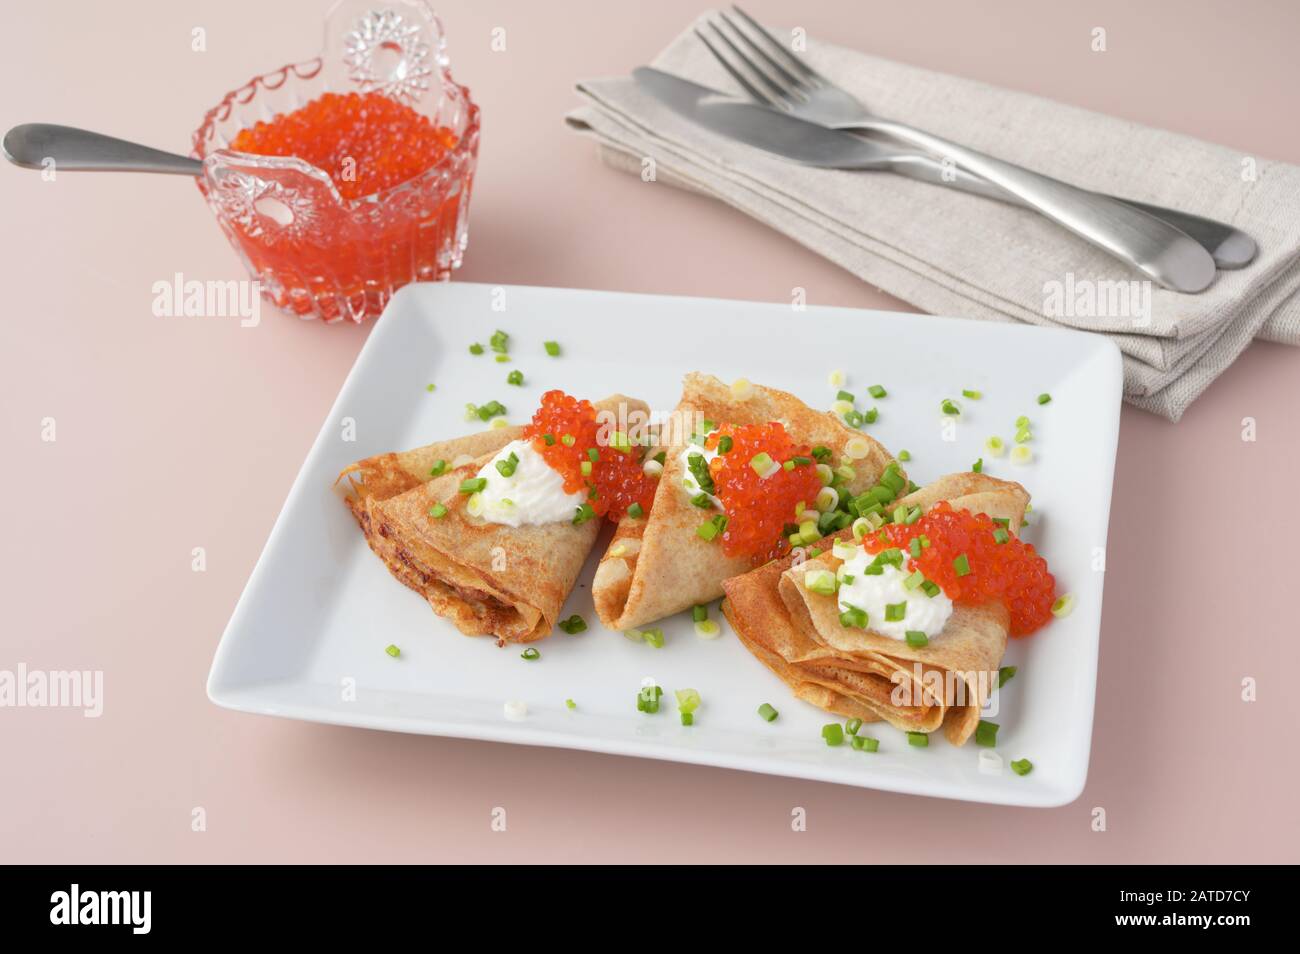 Blinis with red caviar and sour cream decorated with green onion Stock Photo